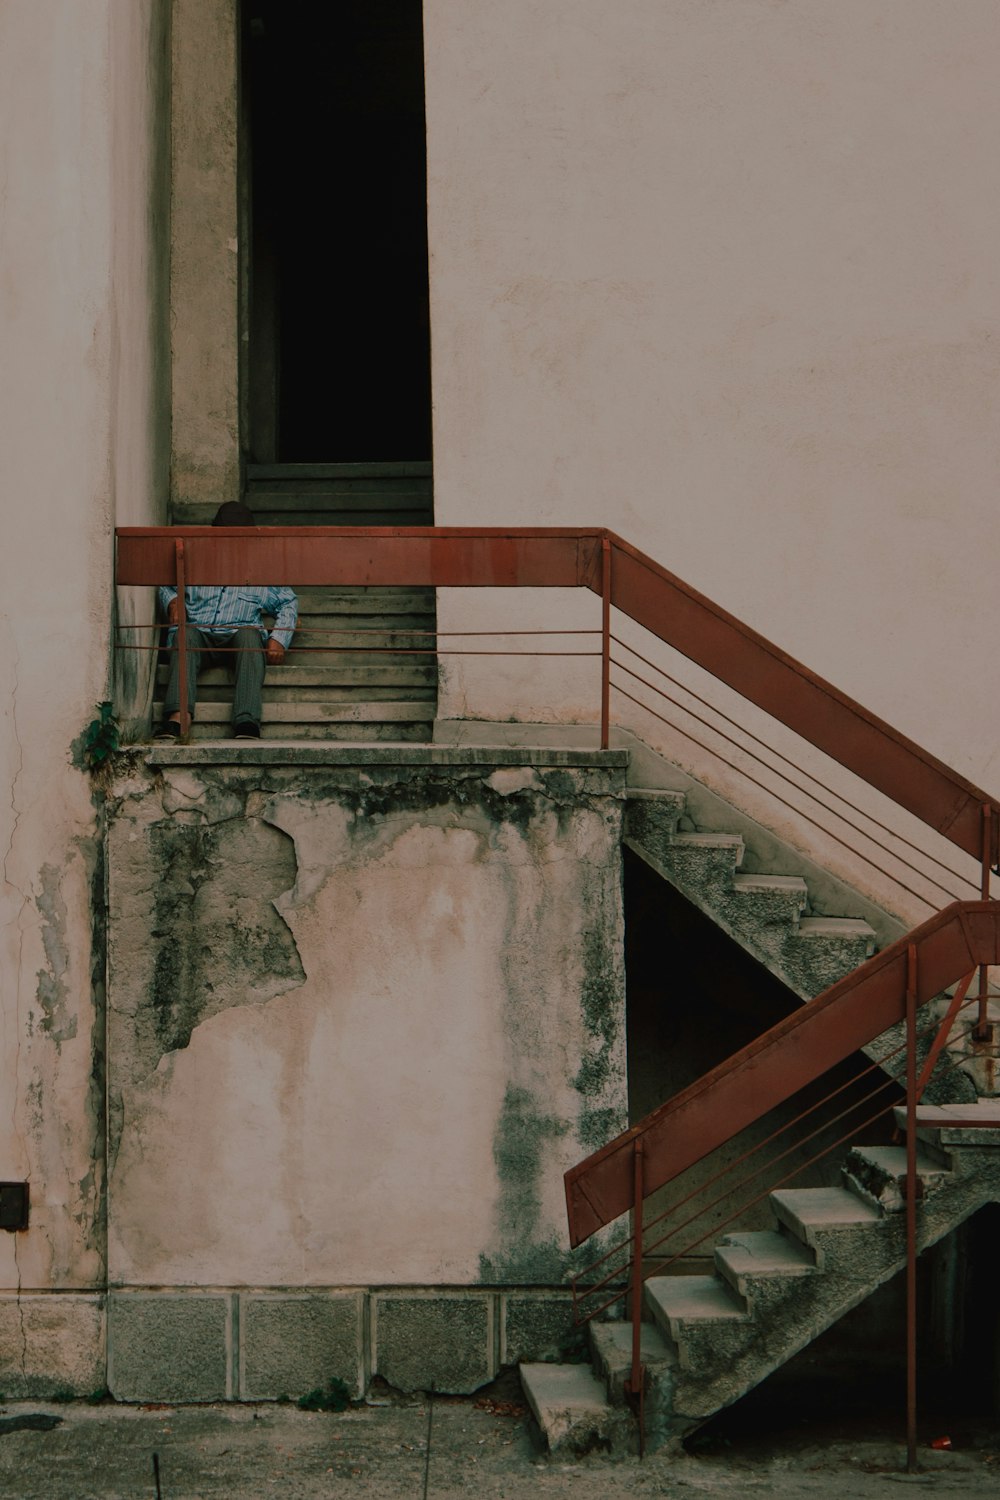 man in blue shirt sitting on concrete stairs